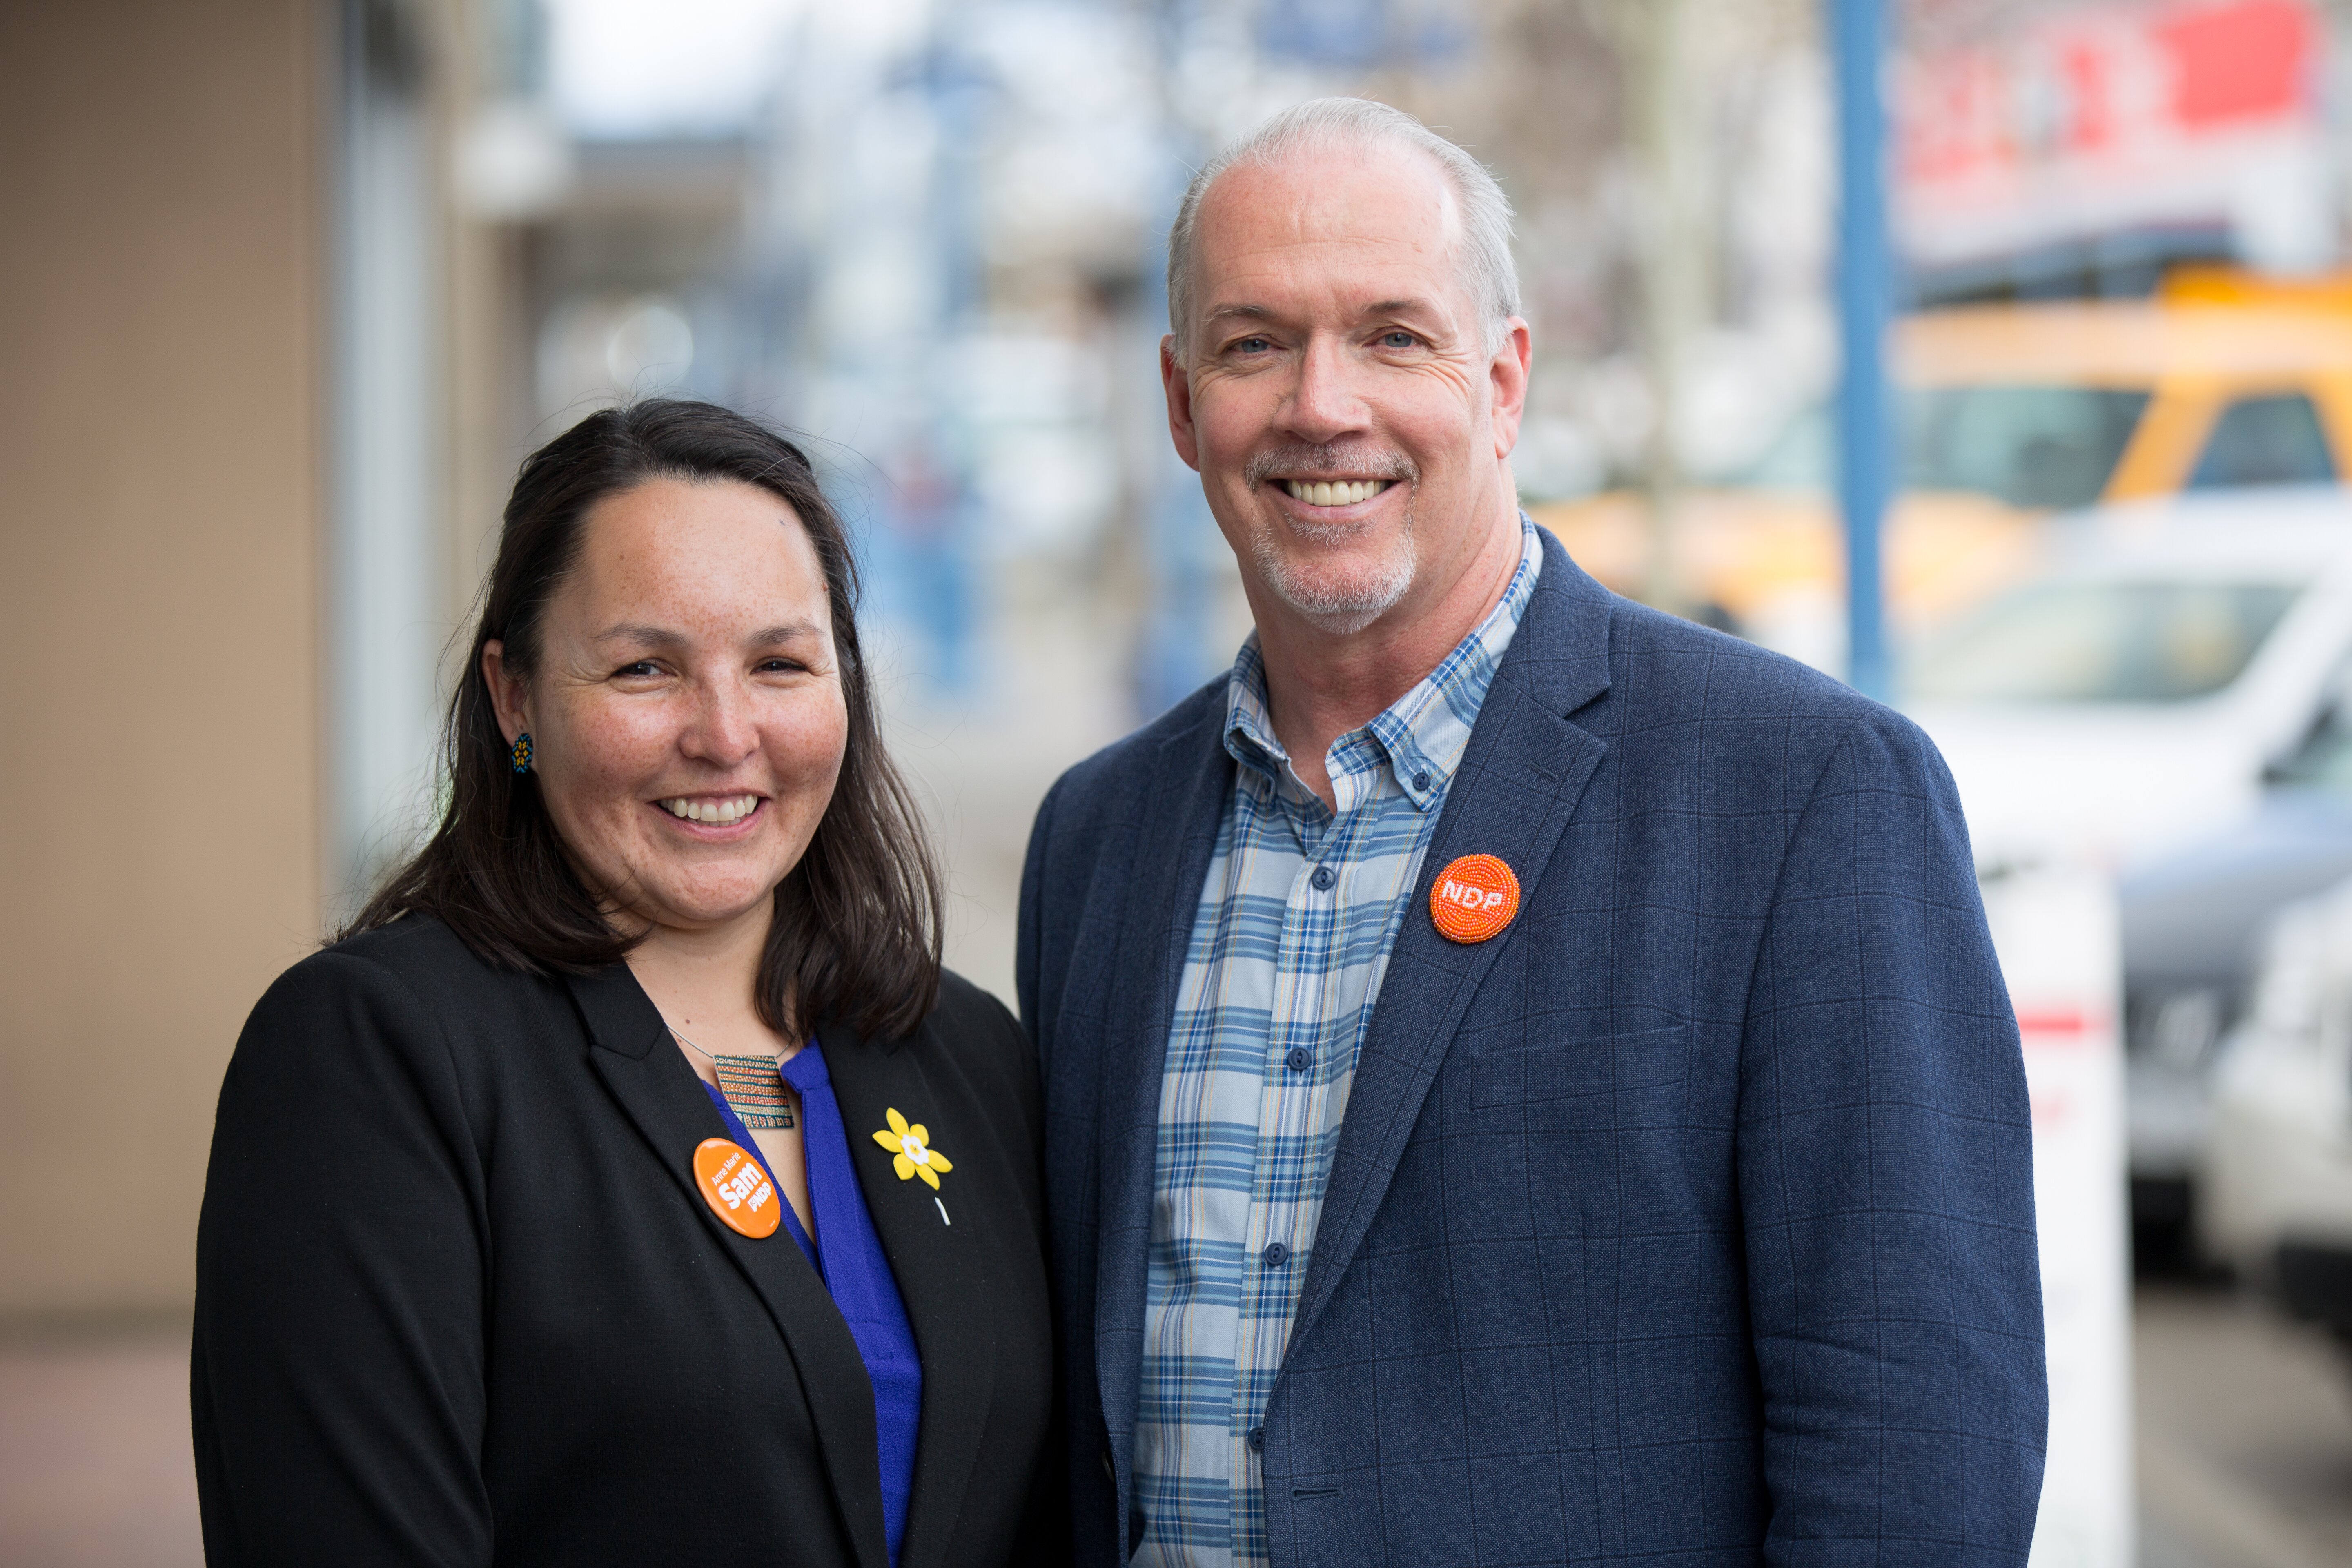 Anne Marie Sam, NDP candidate for Nechako Lakes, stands with party leader John Horgan. Sam is a councillor for the Nak'azdli Whut'en, and wants to see a new regulatory process for energy projects in B.C. that enables First Nations to provide their consent. Anne Marie Sam